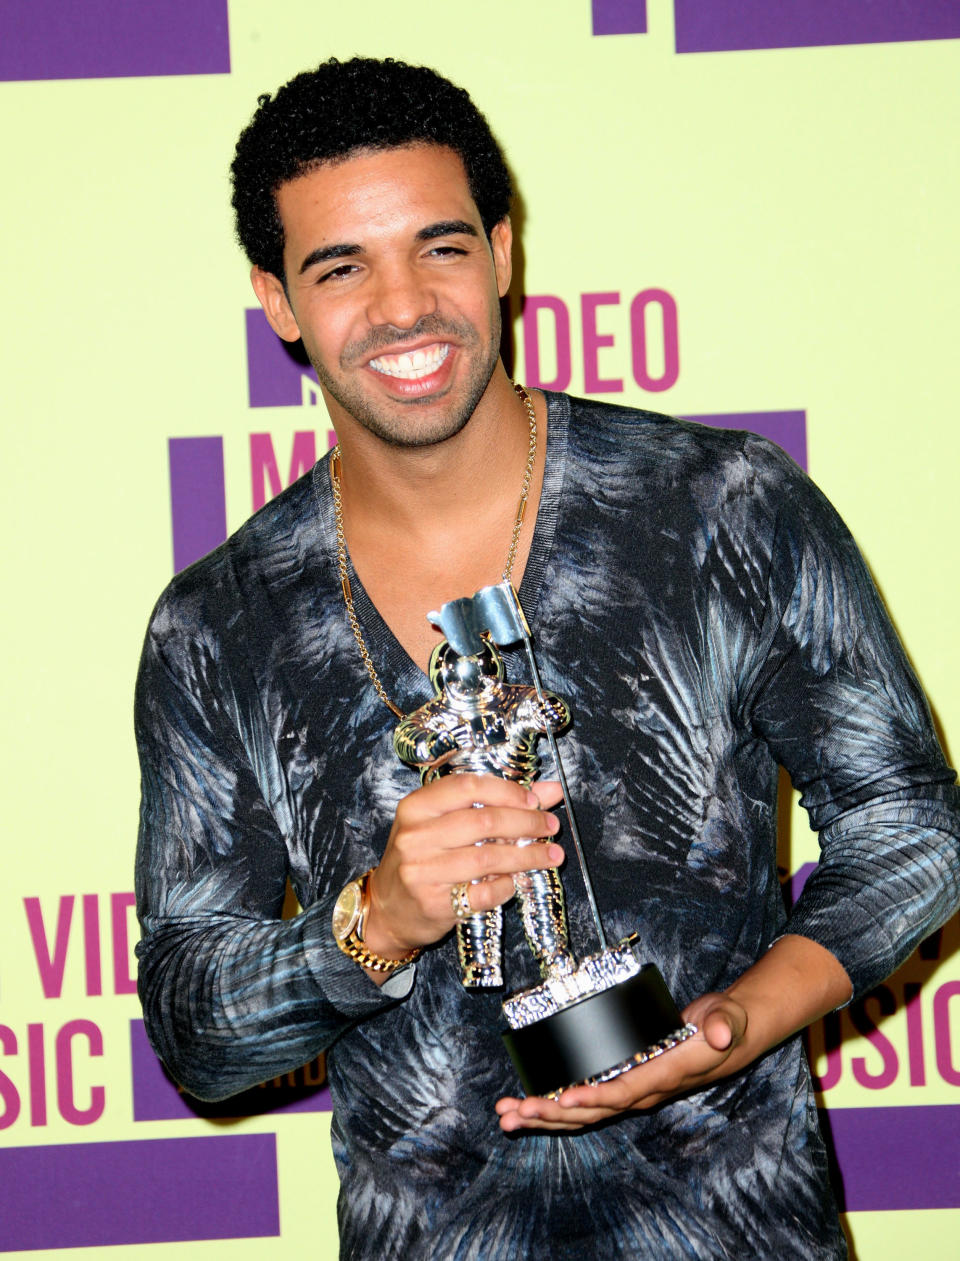 LOS ANGELES, CA - SEPTEMBER 06:  Drake poses with his Best Hip-Hop Video award in the press room during the 2012 MTV Video Music Awards at Staples Center on September 6, 2012 in Los Angeles, California.  (Photo by Frederick M. Brown/Getty Images)